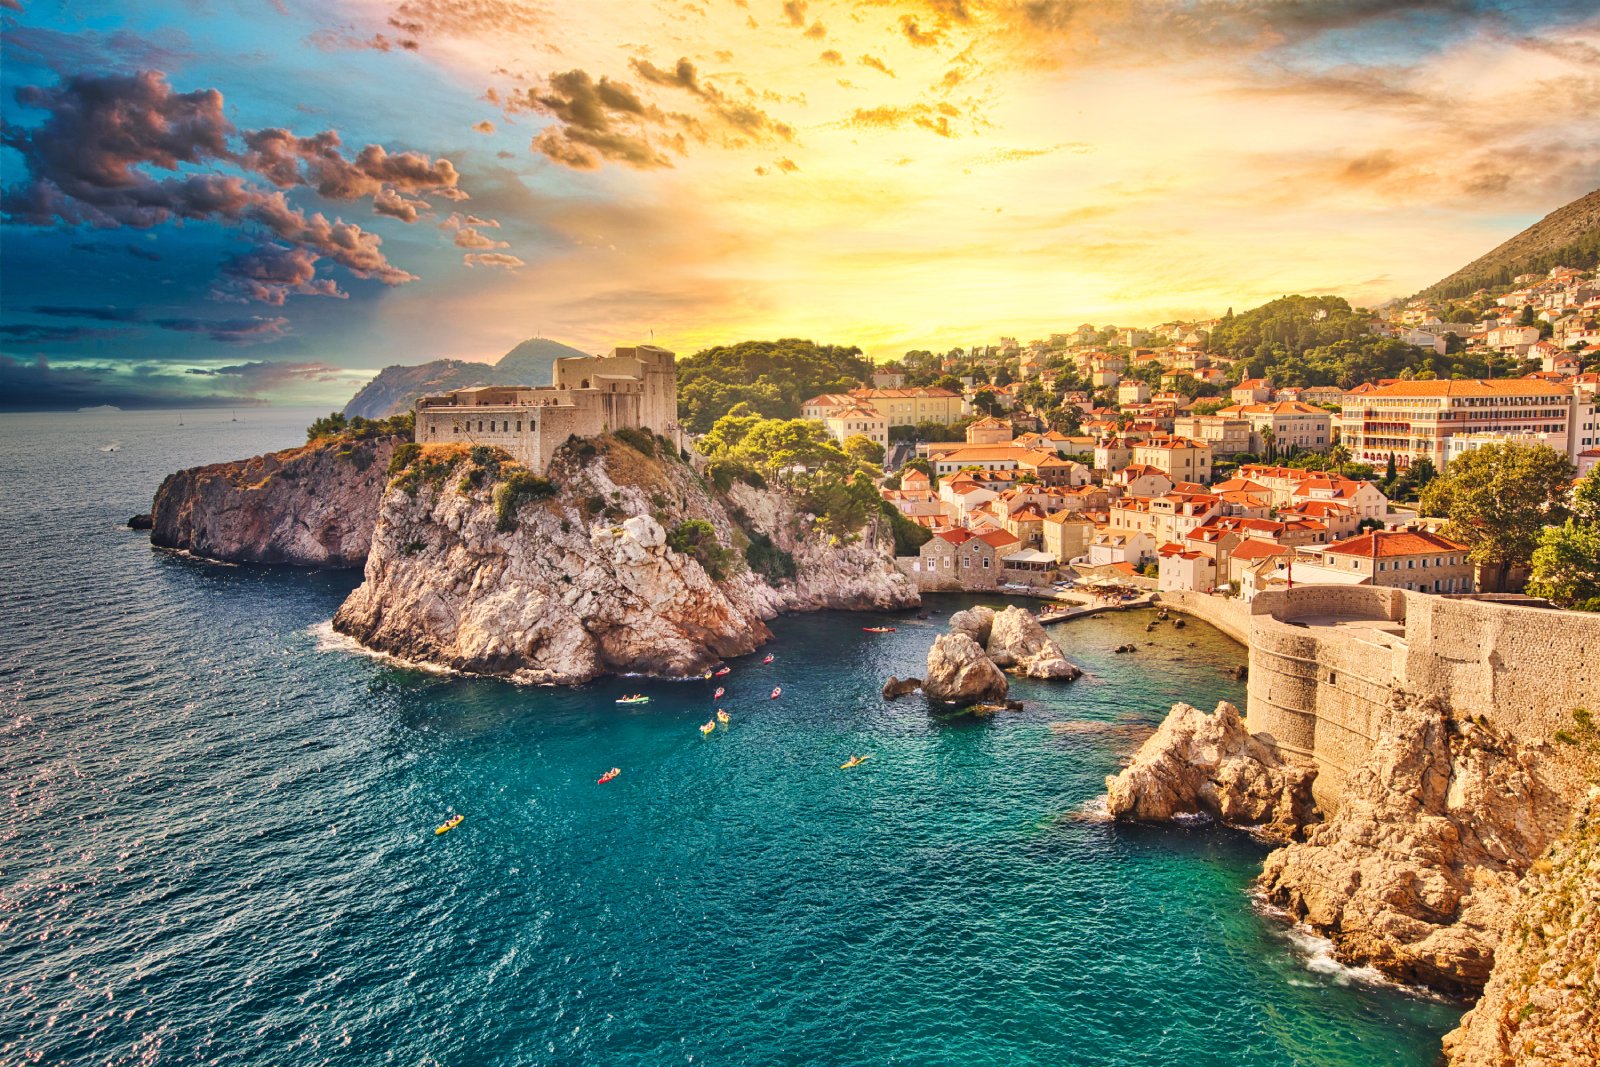 <p class="wp-caption-text">Image Credit: Shutterstock / Benny Marty</p>  <p><span>Thanks to its starring role in a certain fantasy TV series, Dubrovnik’s ancient streets are swamped by fans and fun-seekers, turning the Pearl of the Adriatic into a theme park without the admission fee.</span></p>